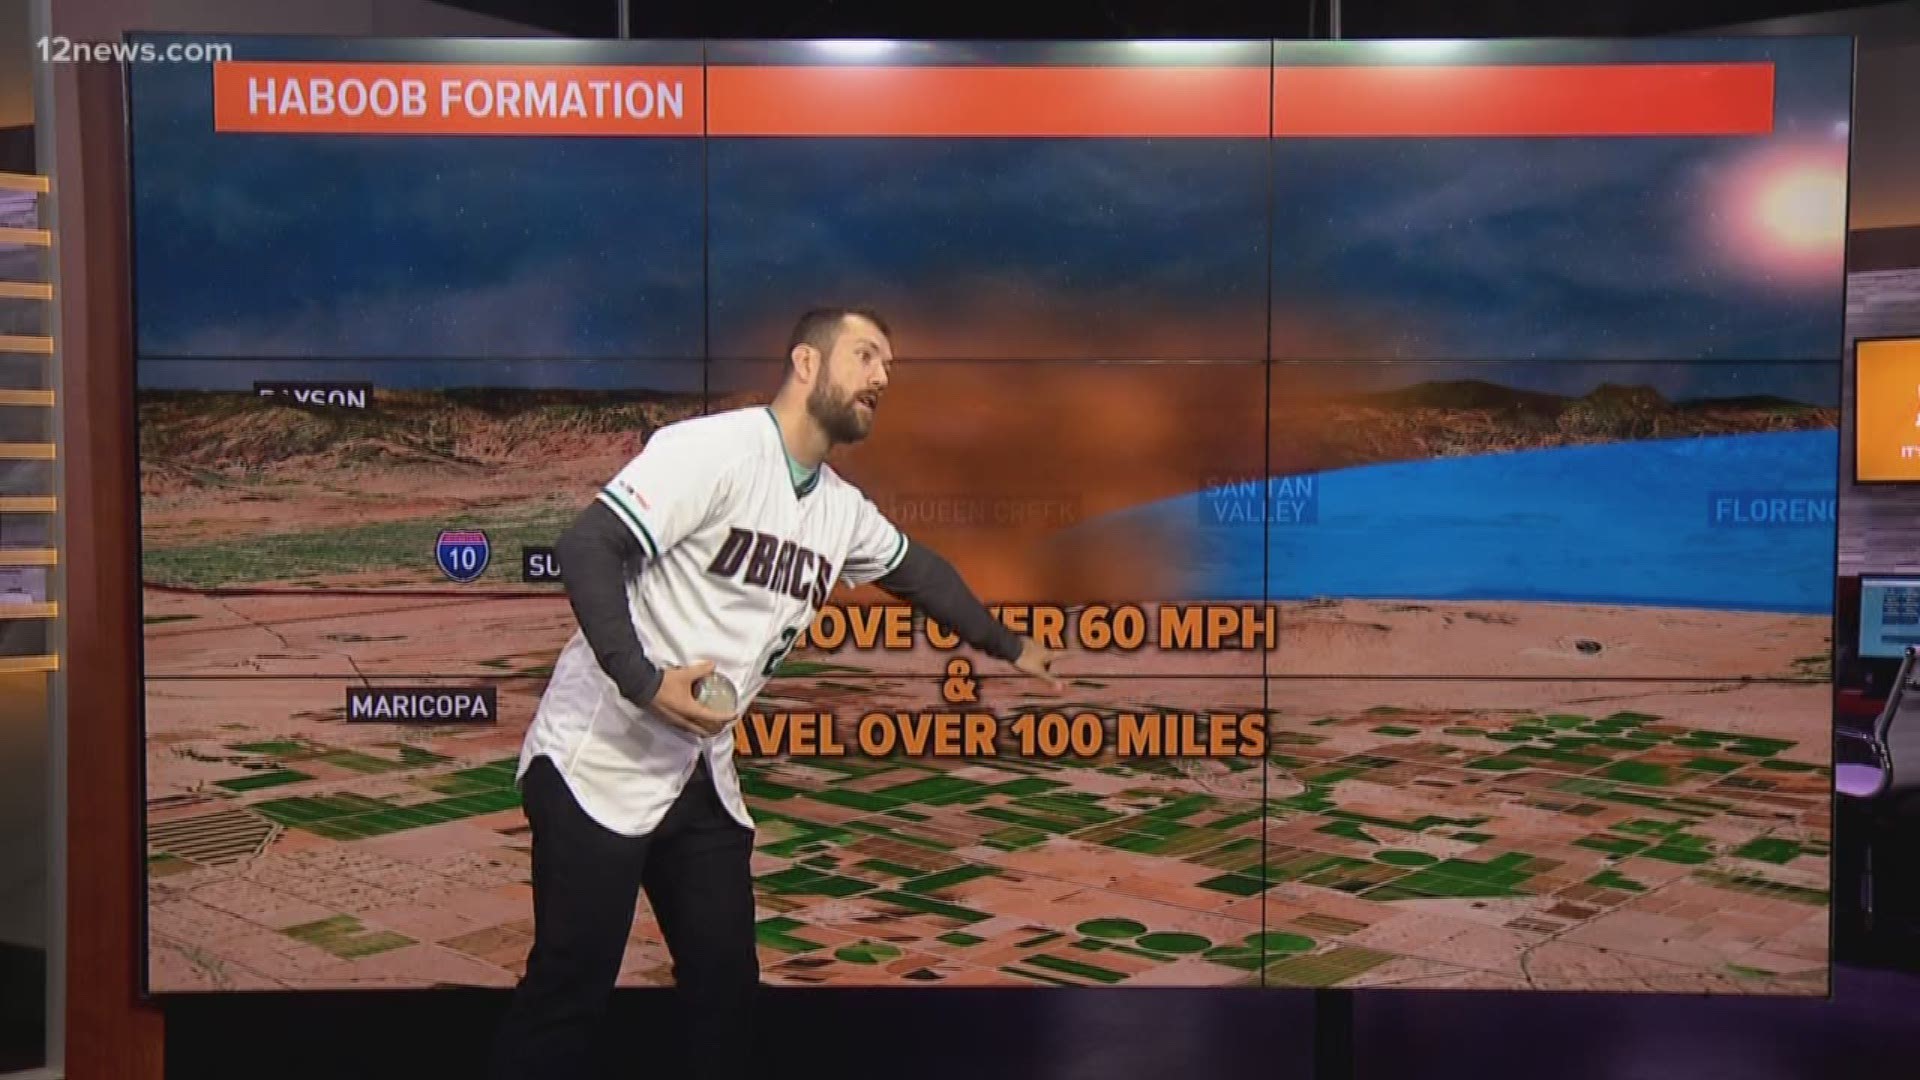 Arizona Diamondbacks outfielder Steven Souza Jr. stopped by Studio 12A to talk about the Haboob Globe giveaway at Chase Field. But we couldn't let him leave without joining Krystle Henderson's weather forecast.